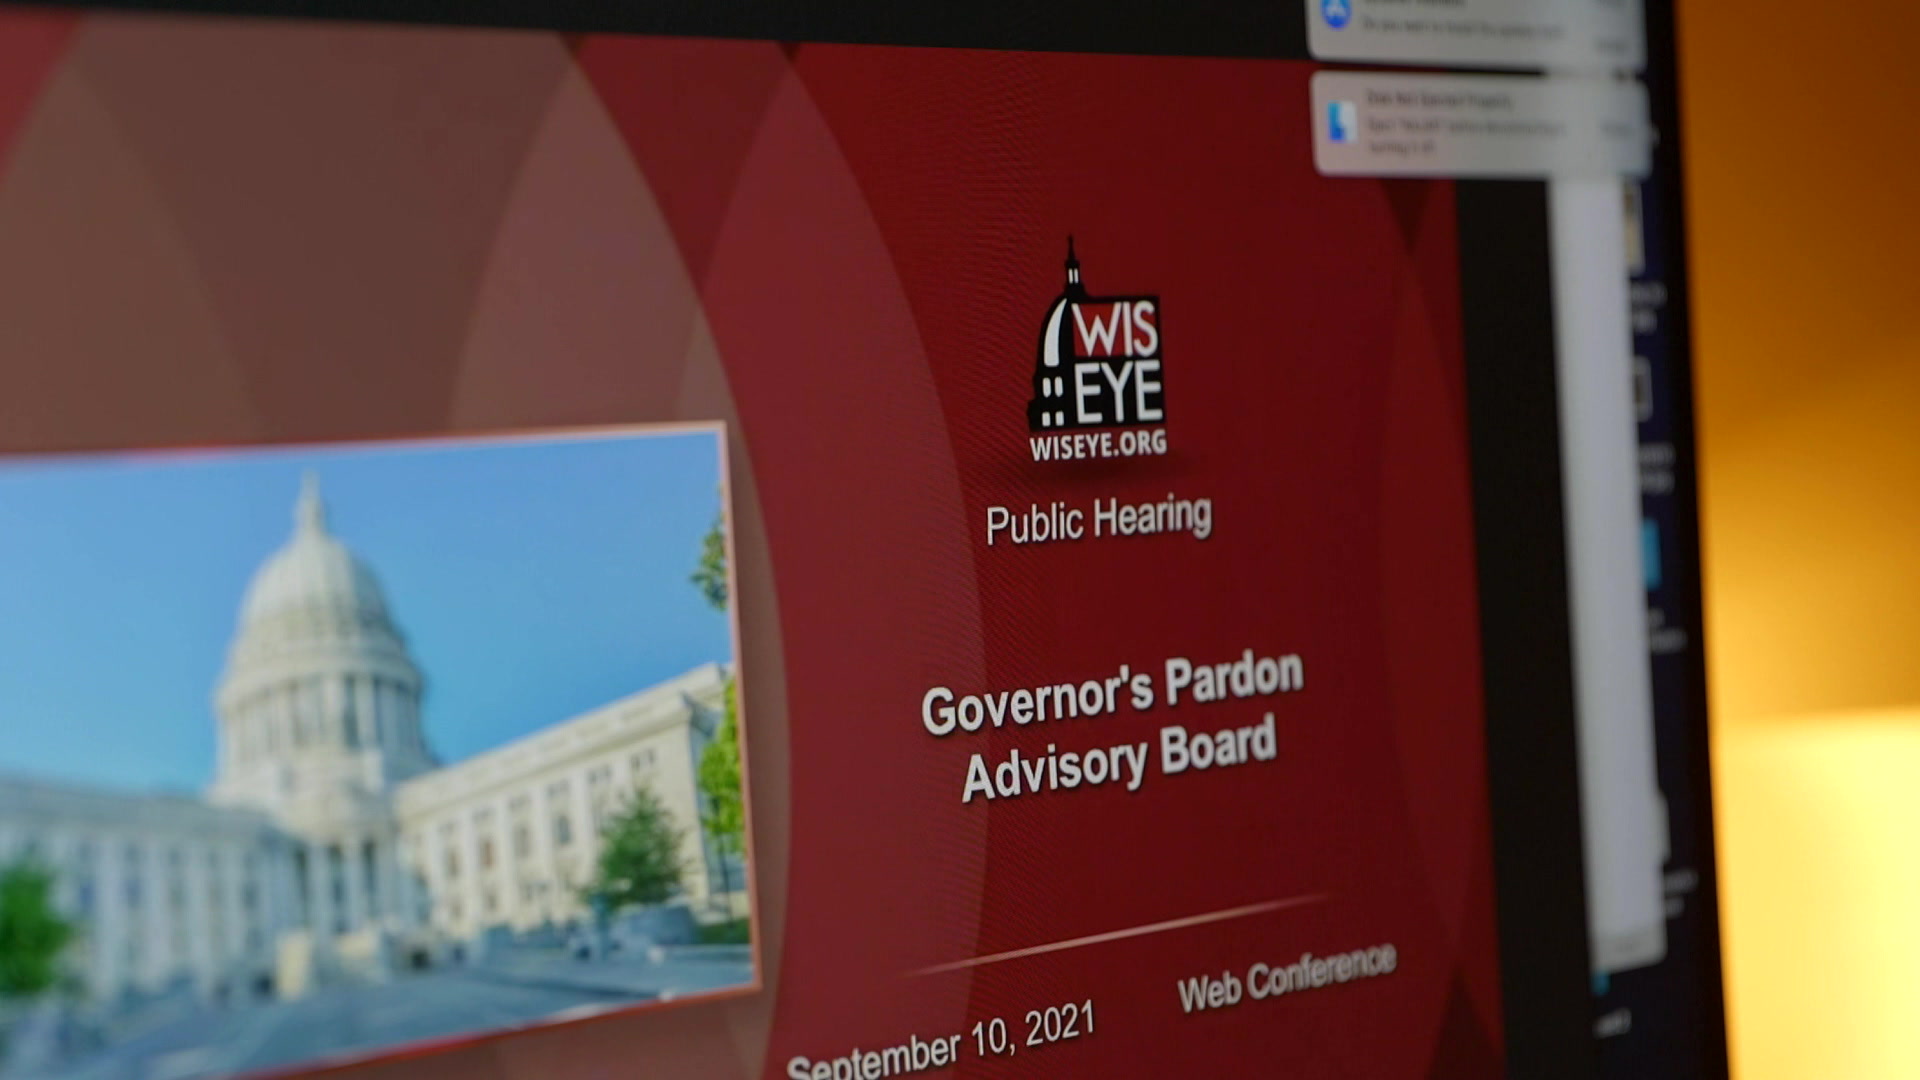 A compter shows the title screen for a WisEye presentation of a Governor's Pardon Advisory Board web conference.